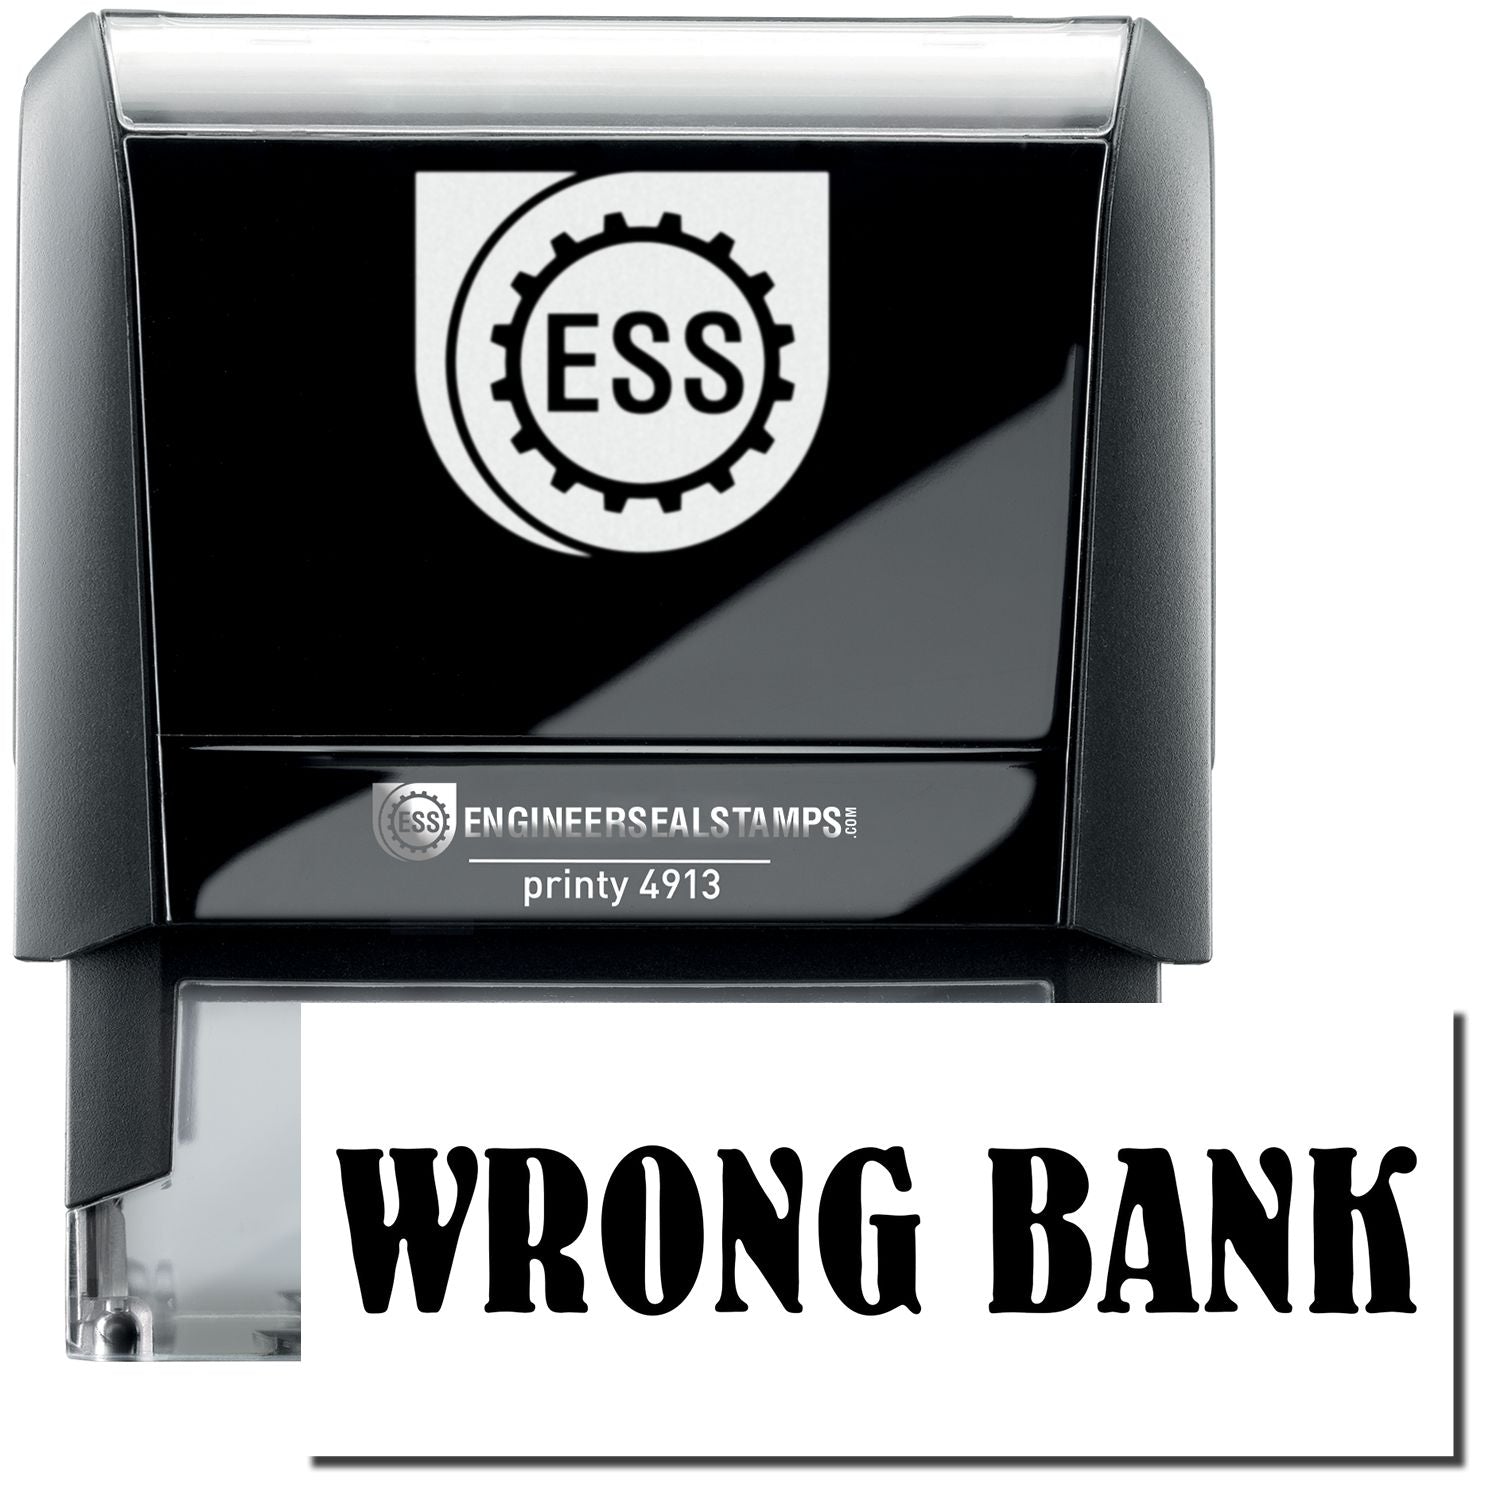 A self-inking stamp with a stamped image showing how the text "WRONG BANK" in a large bold font is displayed by it.